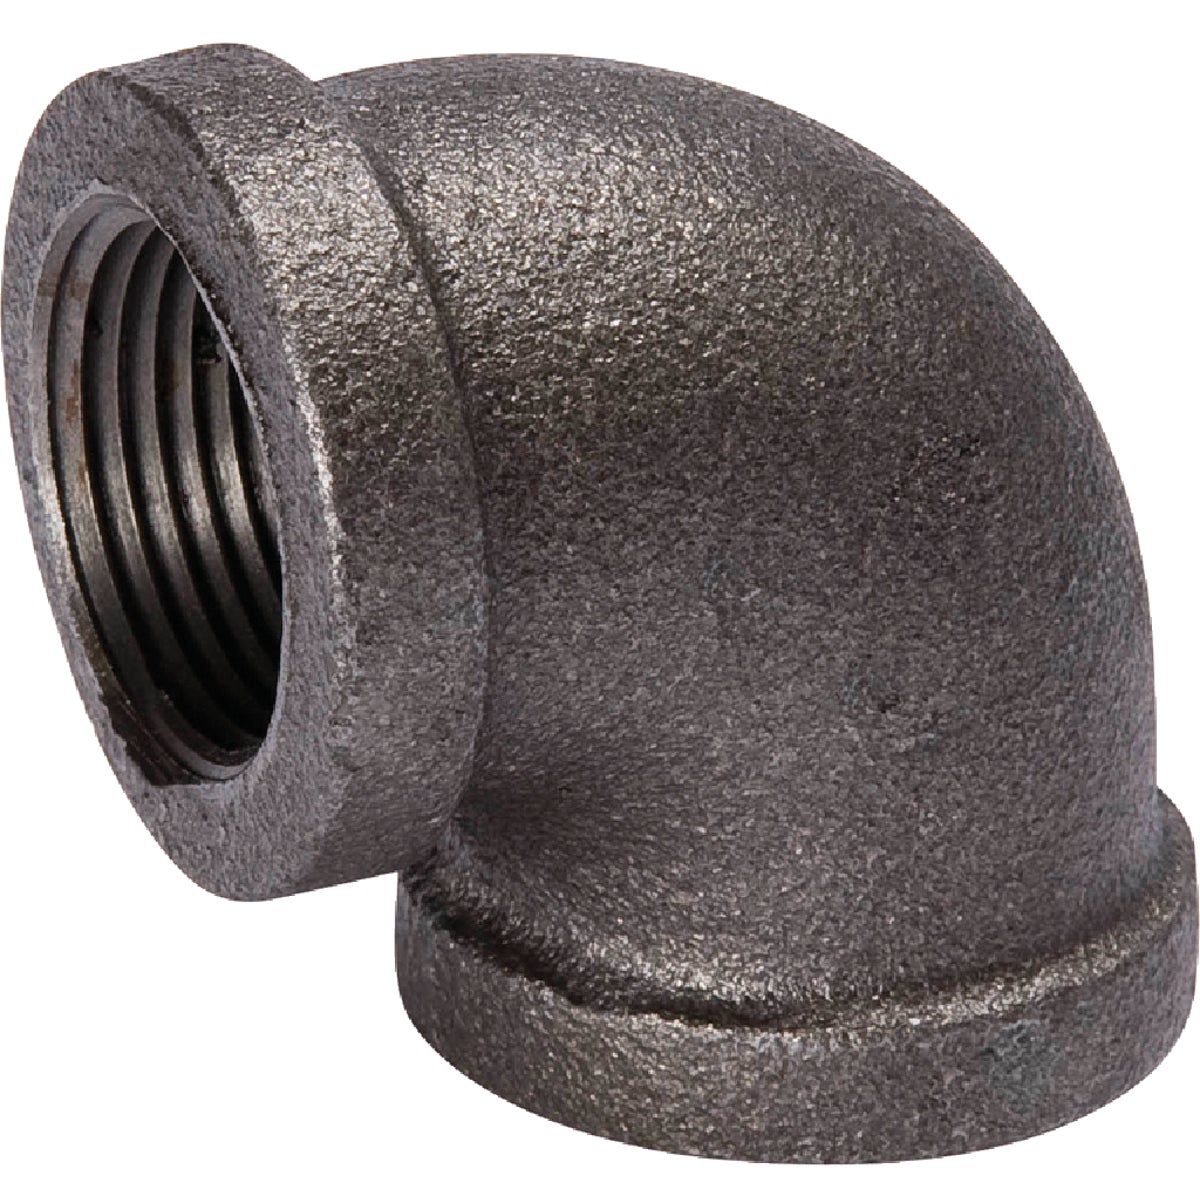 Southland 1-1/4 In. 90 Deg. Malleable Black Iron Elbow (1/4 Bend)